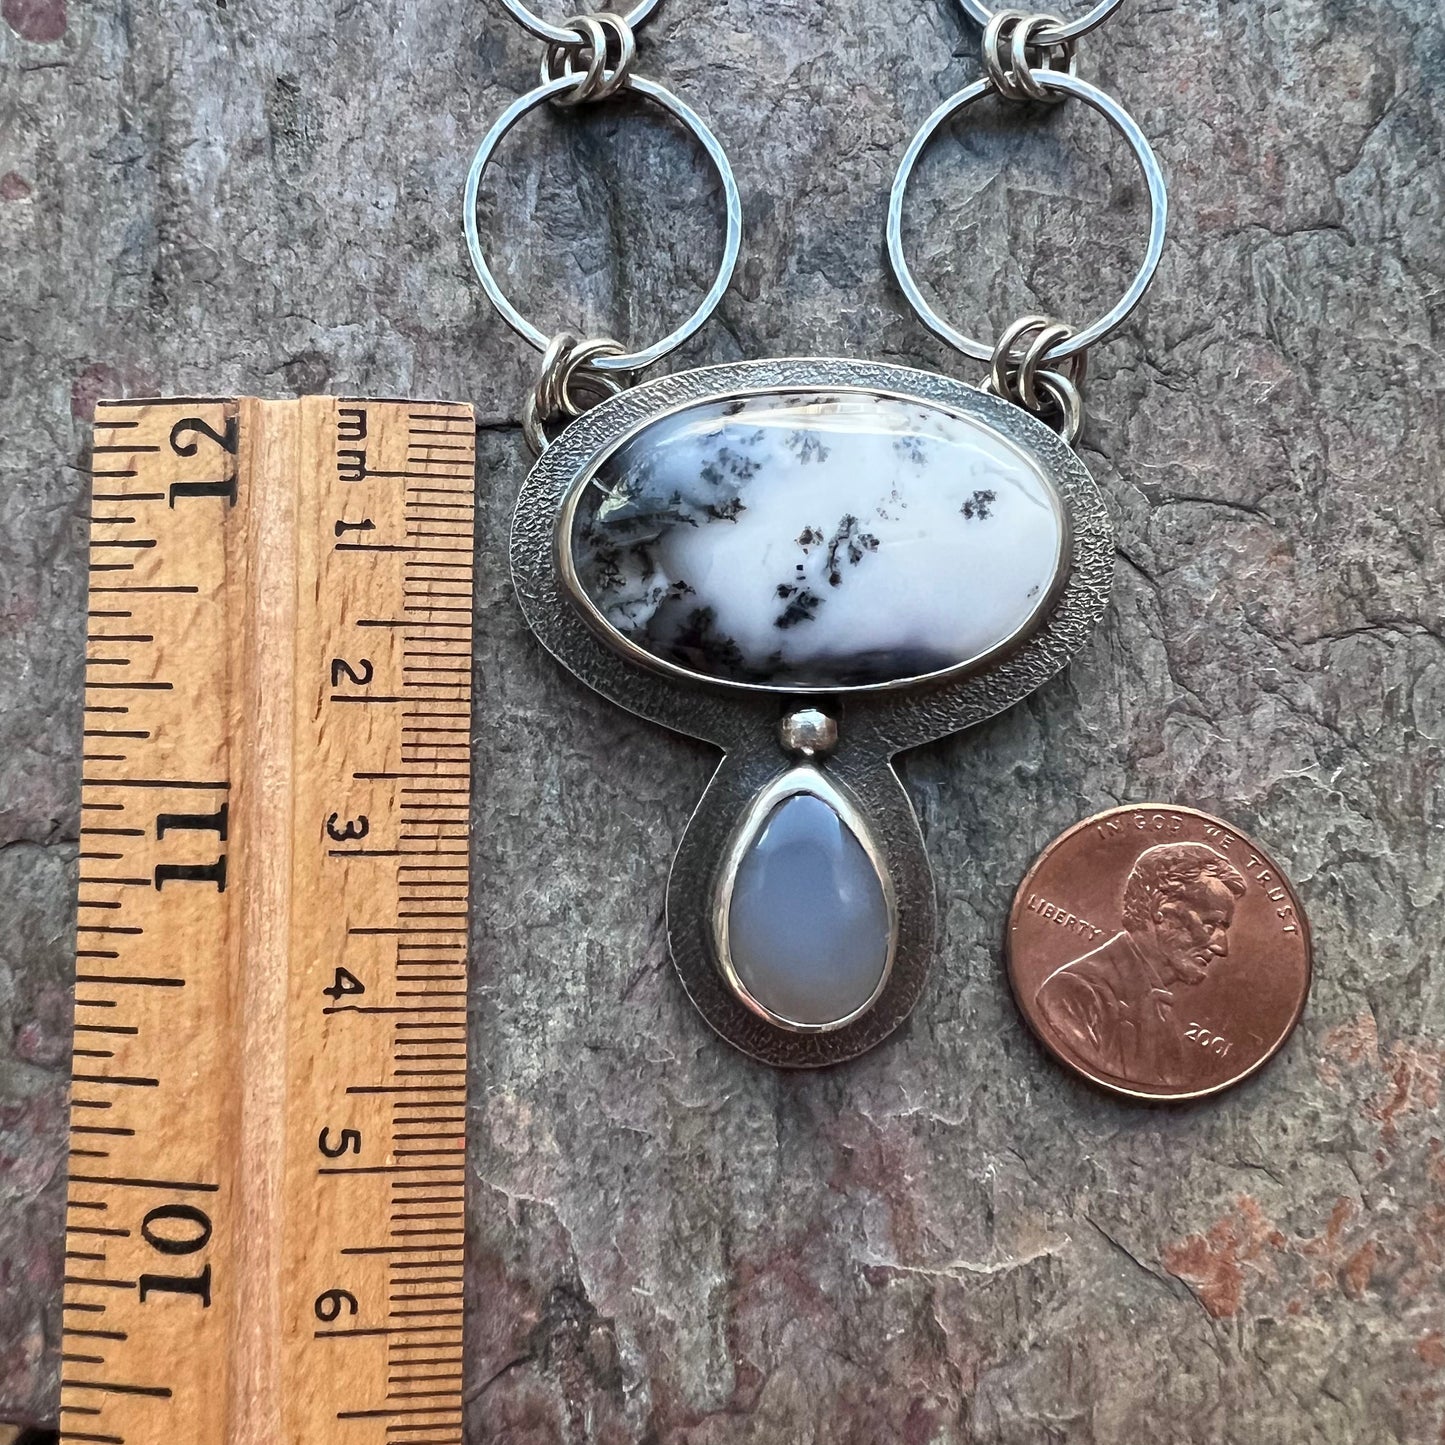 Dendritic Opal and Chalcedony Sterling Silver Necklace - Handmade One-of-a-kind Pendant on Sterling Silver Chain